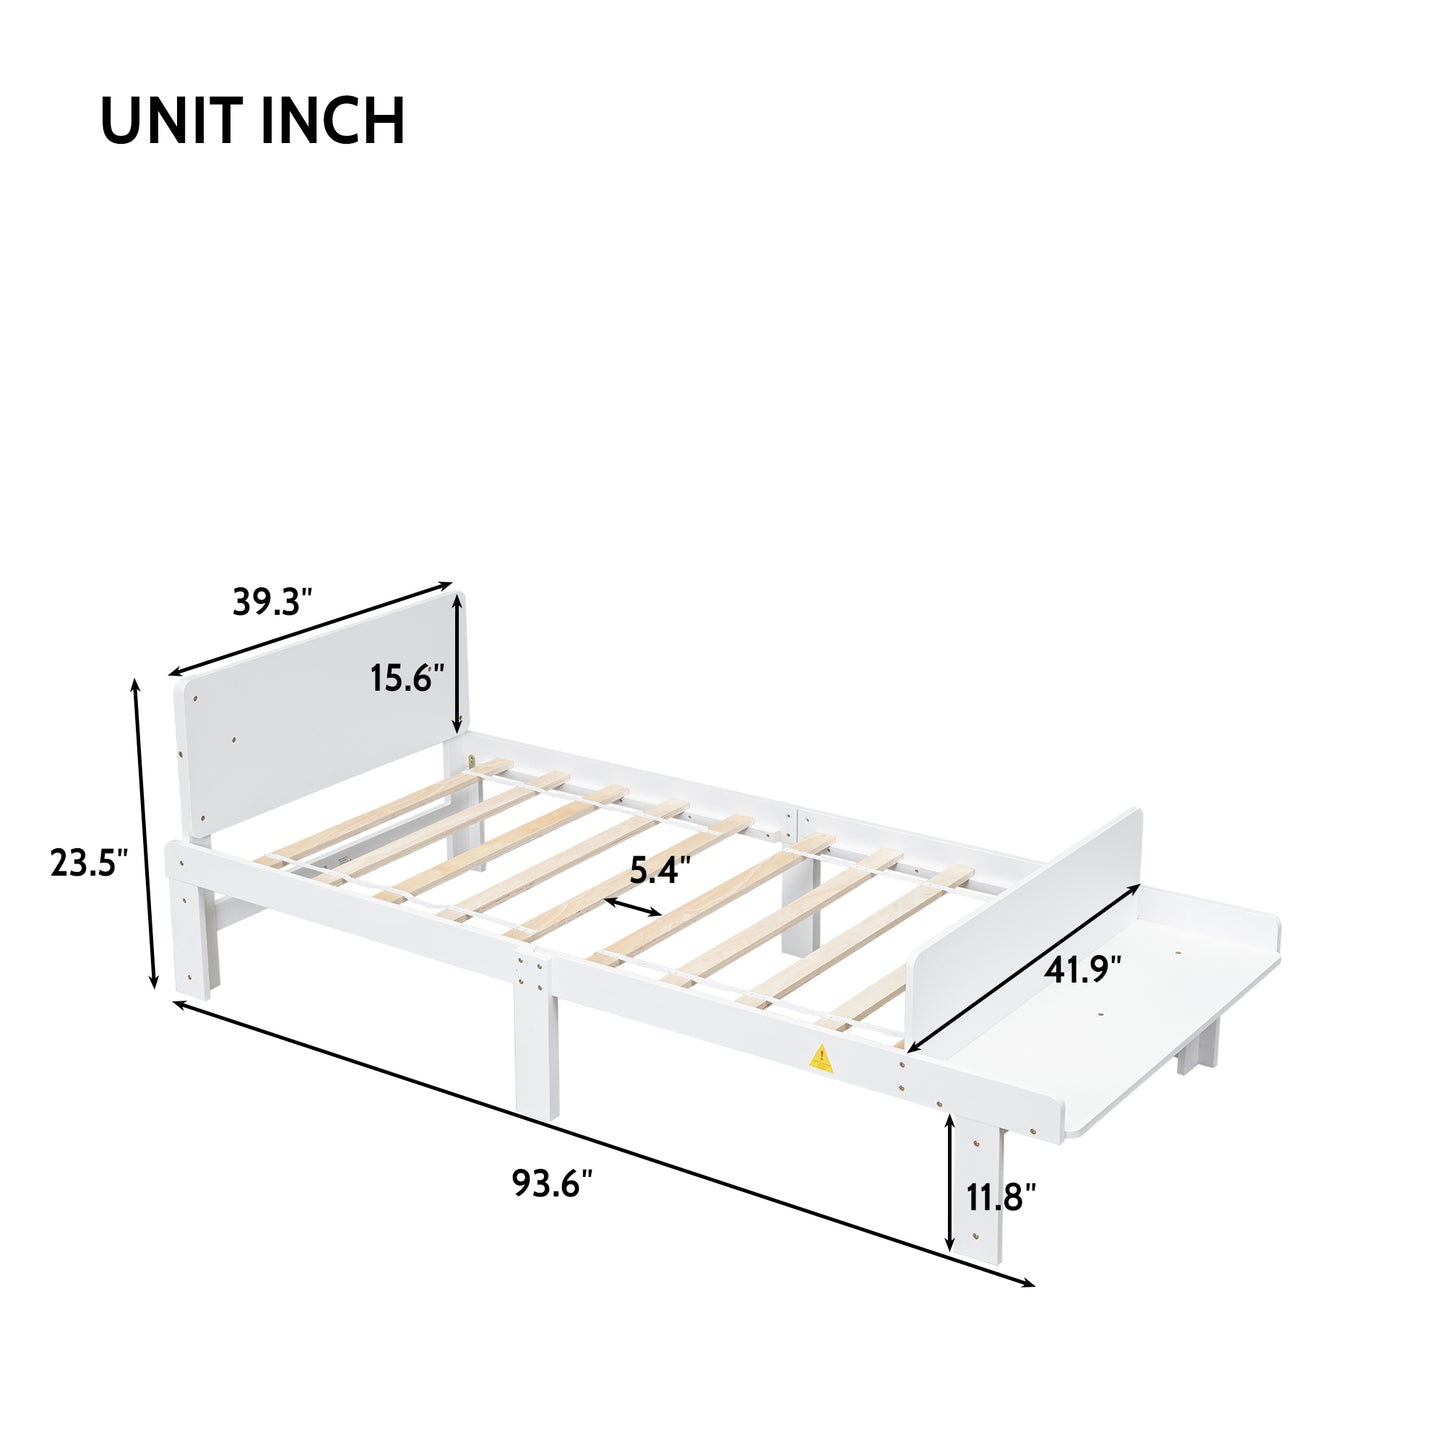 Kids Twin Size Bed, BTMWAY Twin Size Wood Platform Bed Frame with Footboard Bench, Wood Bed Frame for Kids, Modern Twin Platform Bed with Headboard and Slat Support